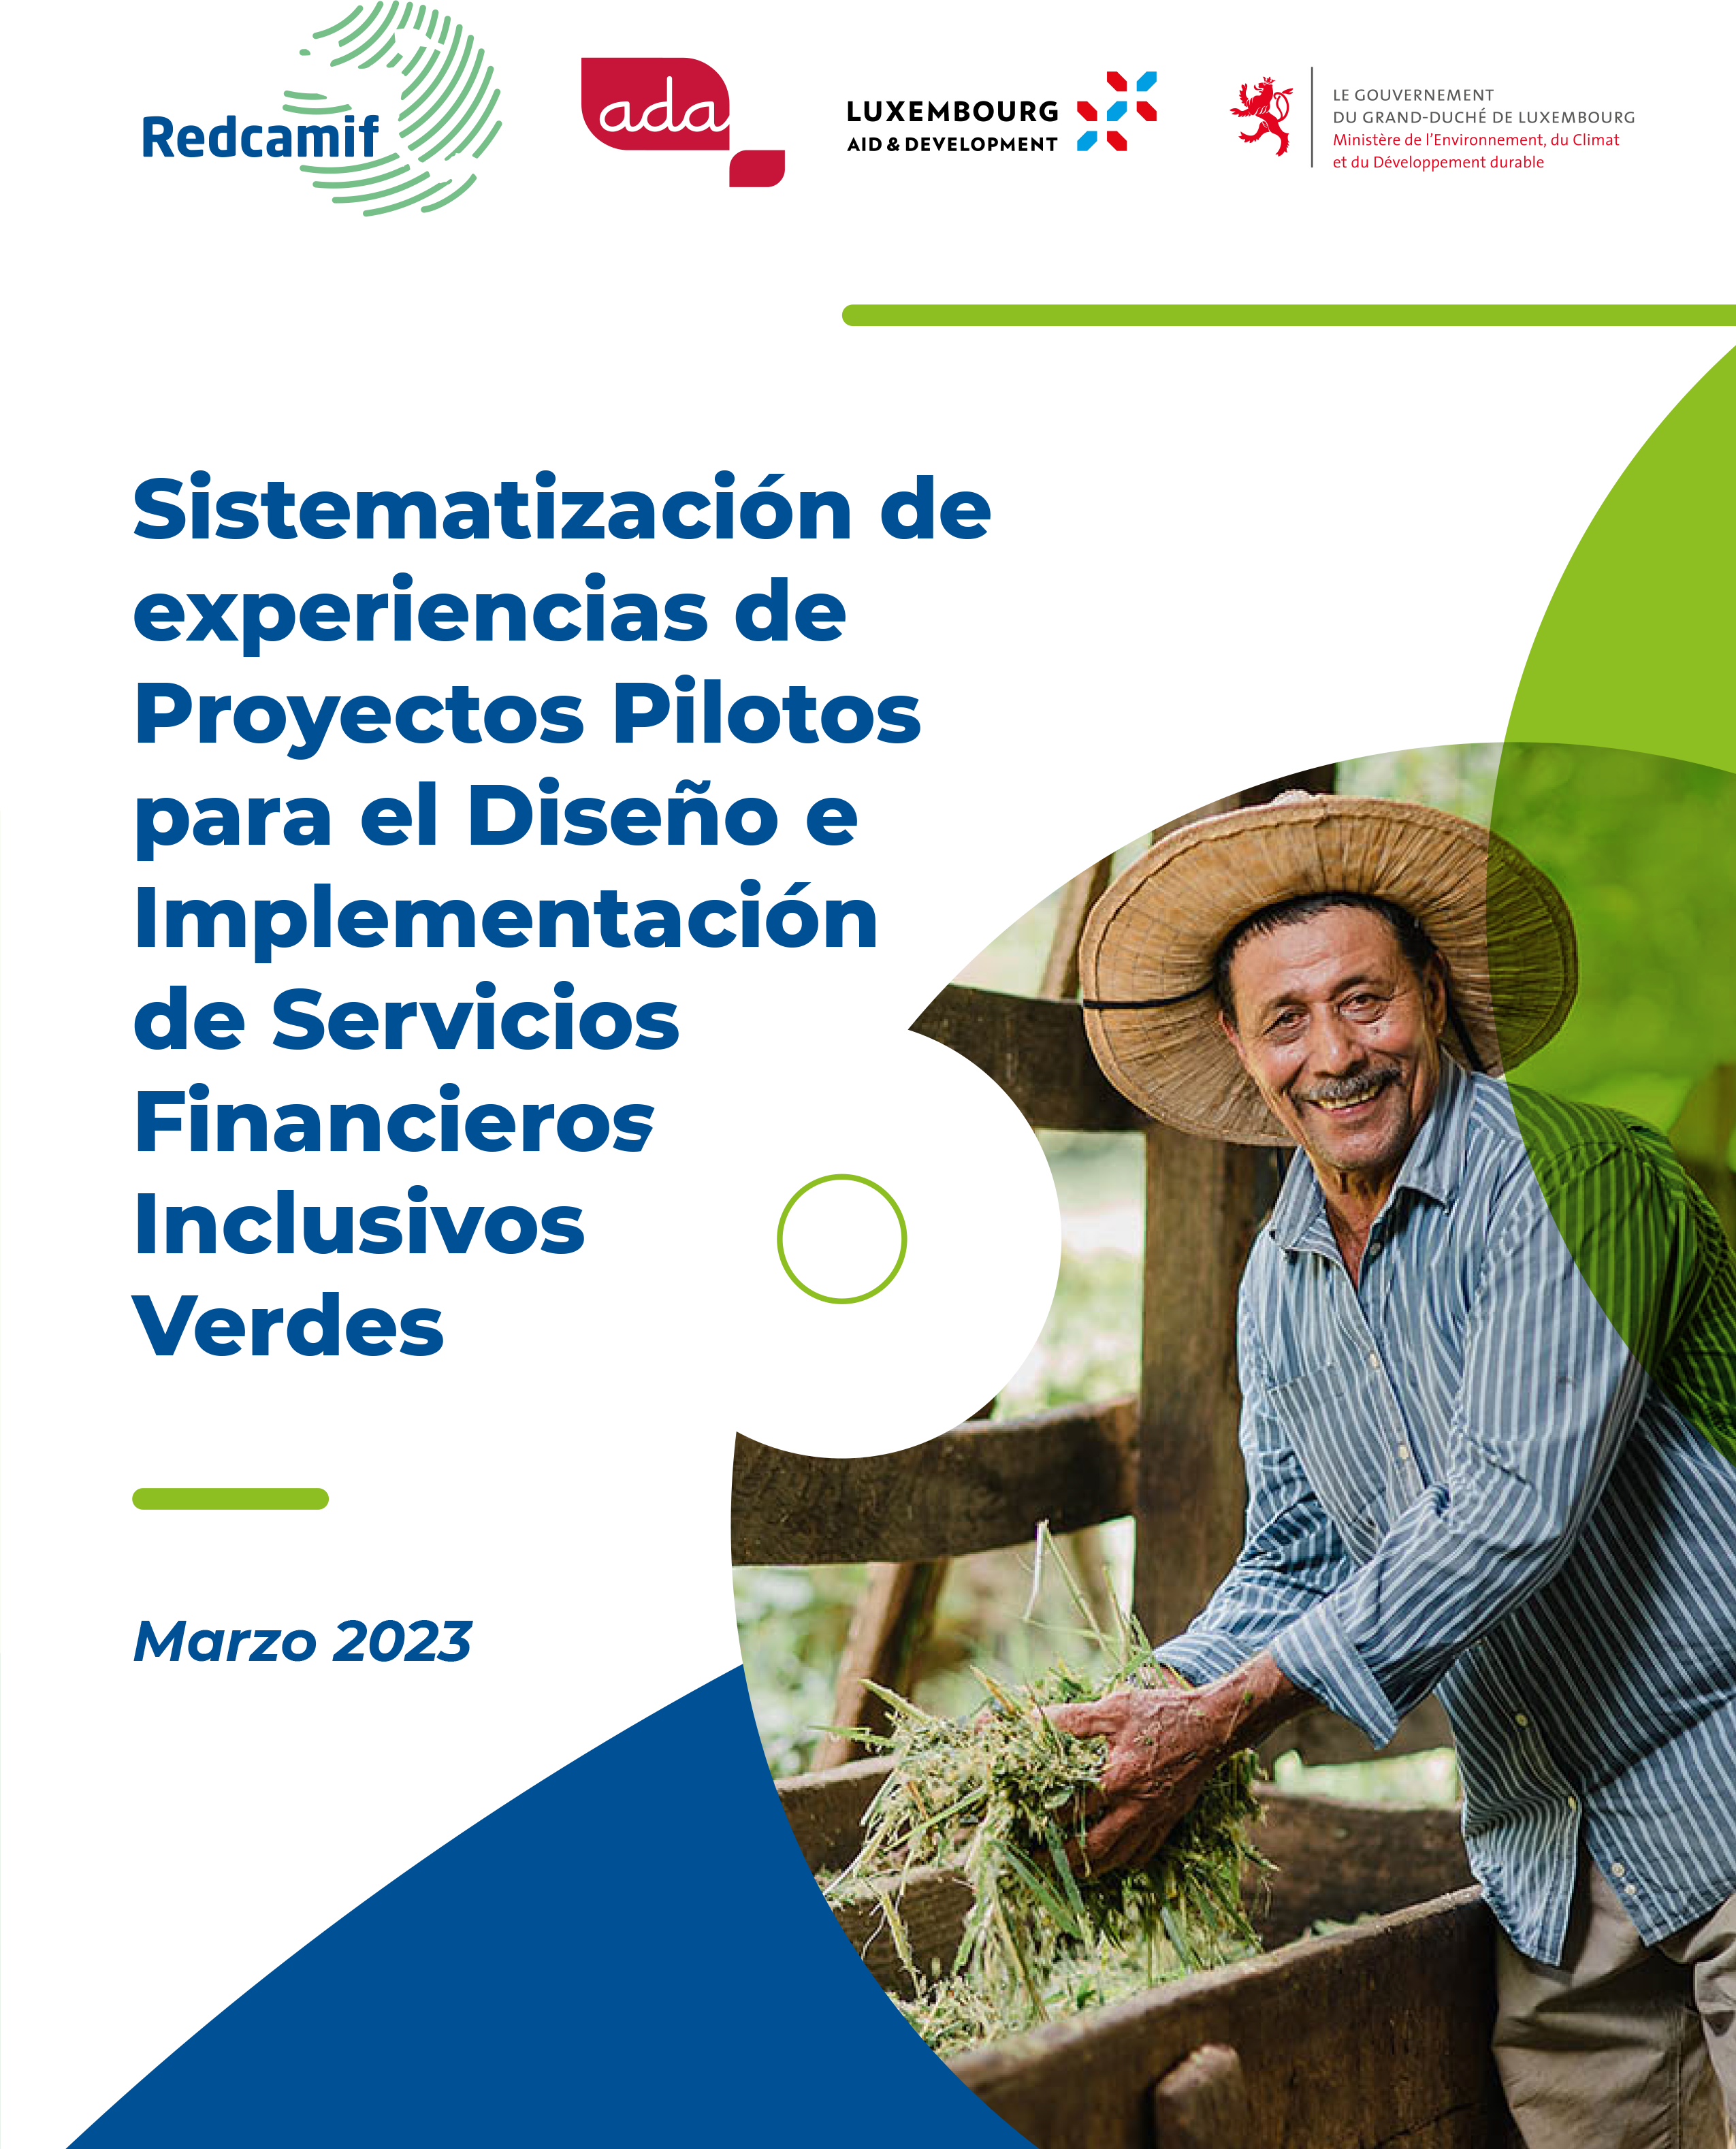 Document: Leveraging the experiences from pilot projects in the design and implementation of green, inclusive financial services